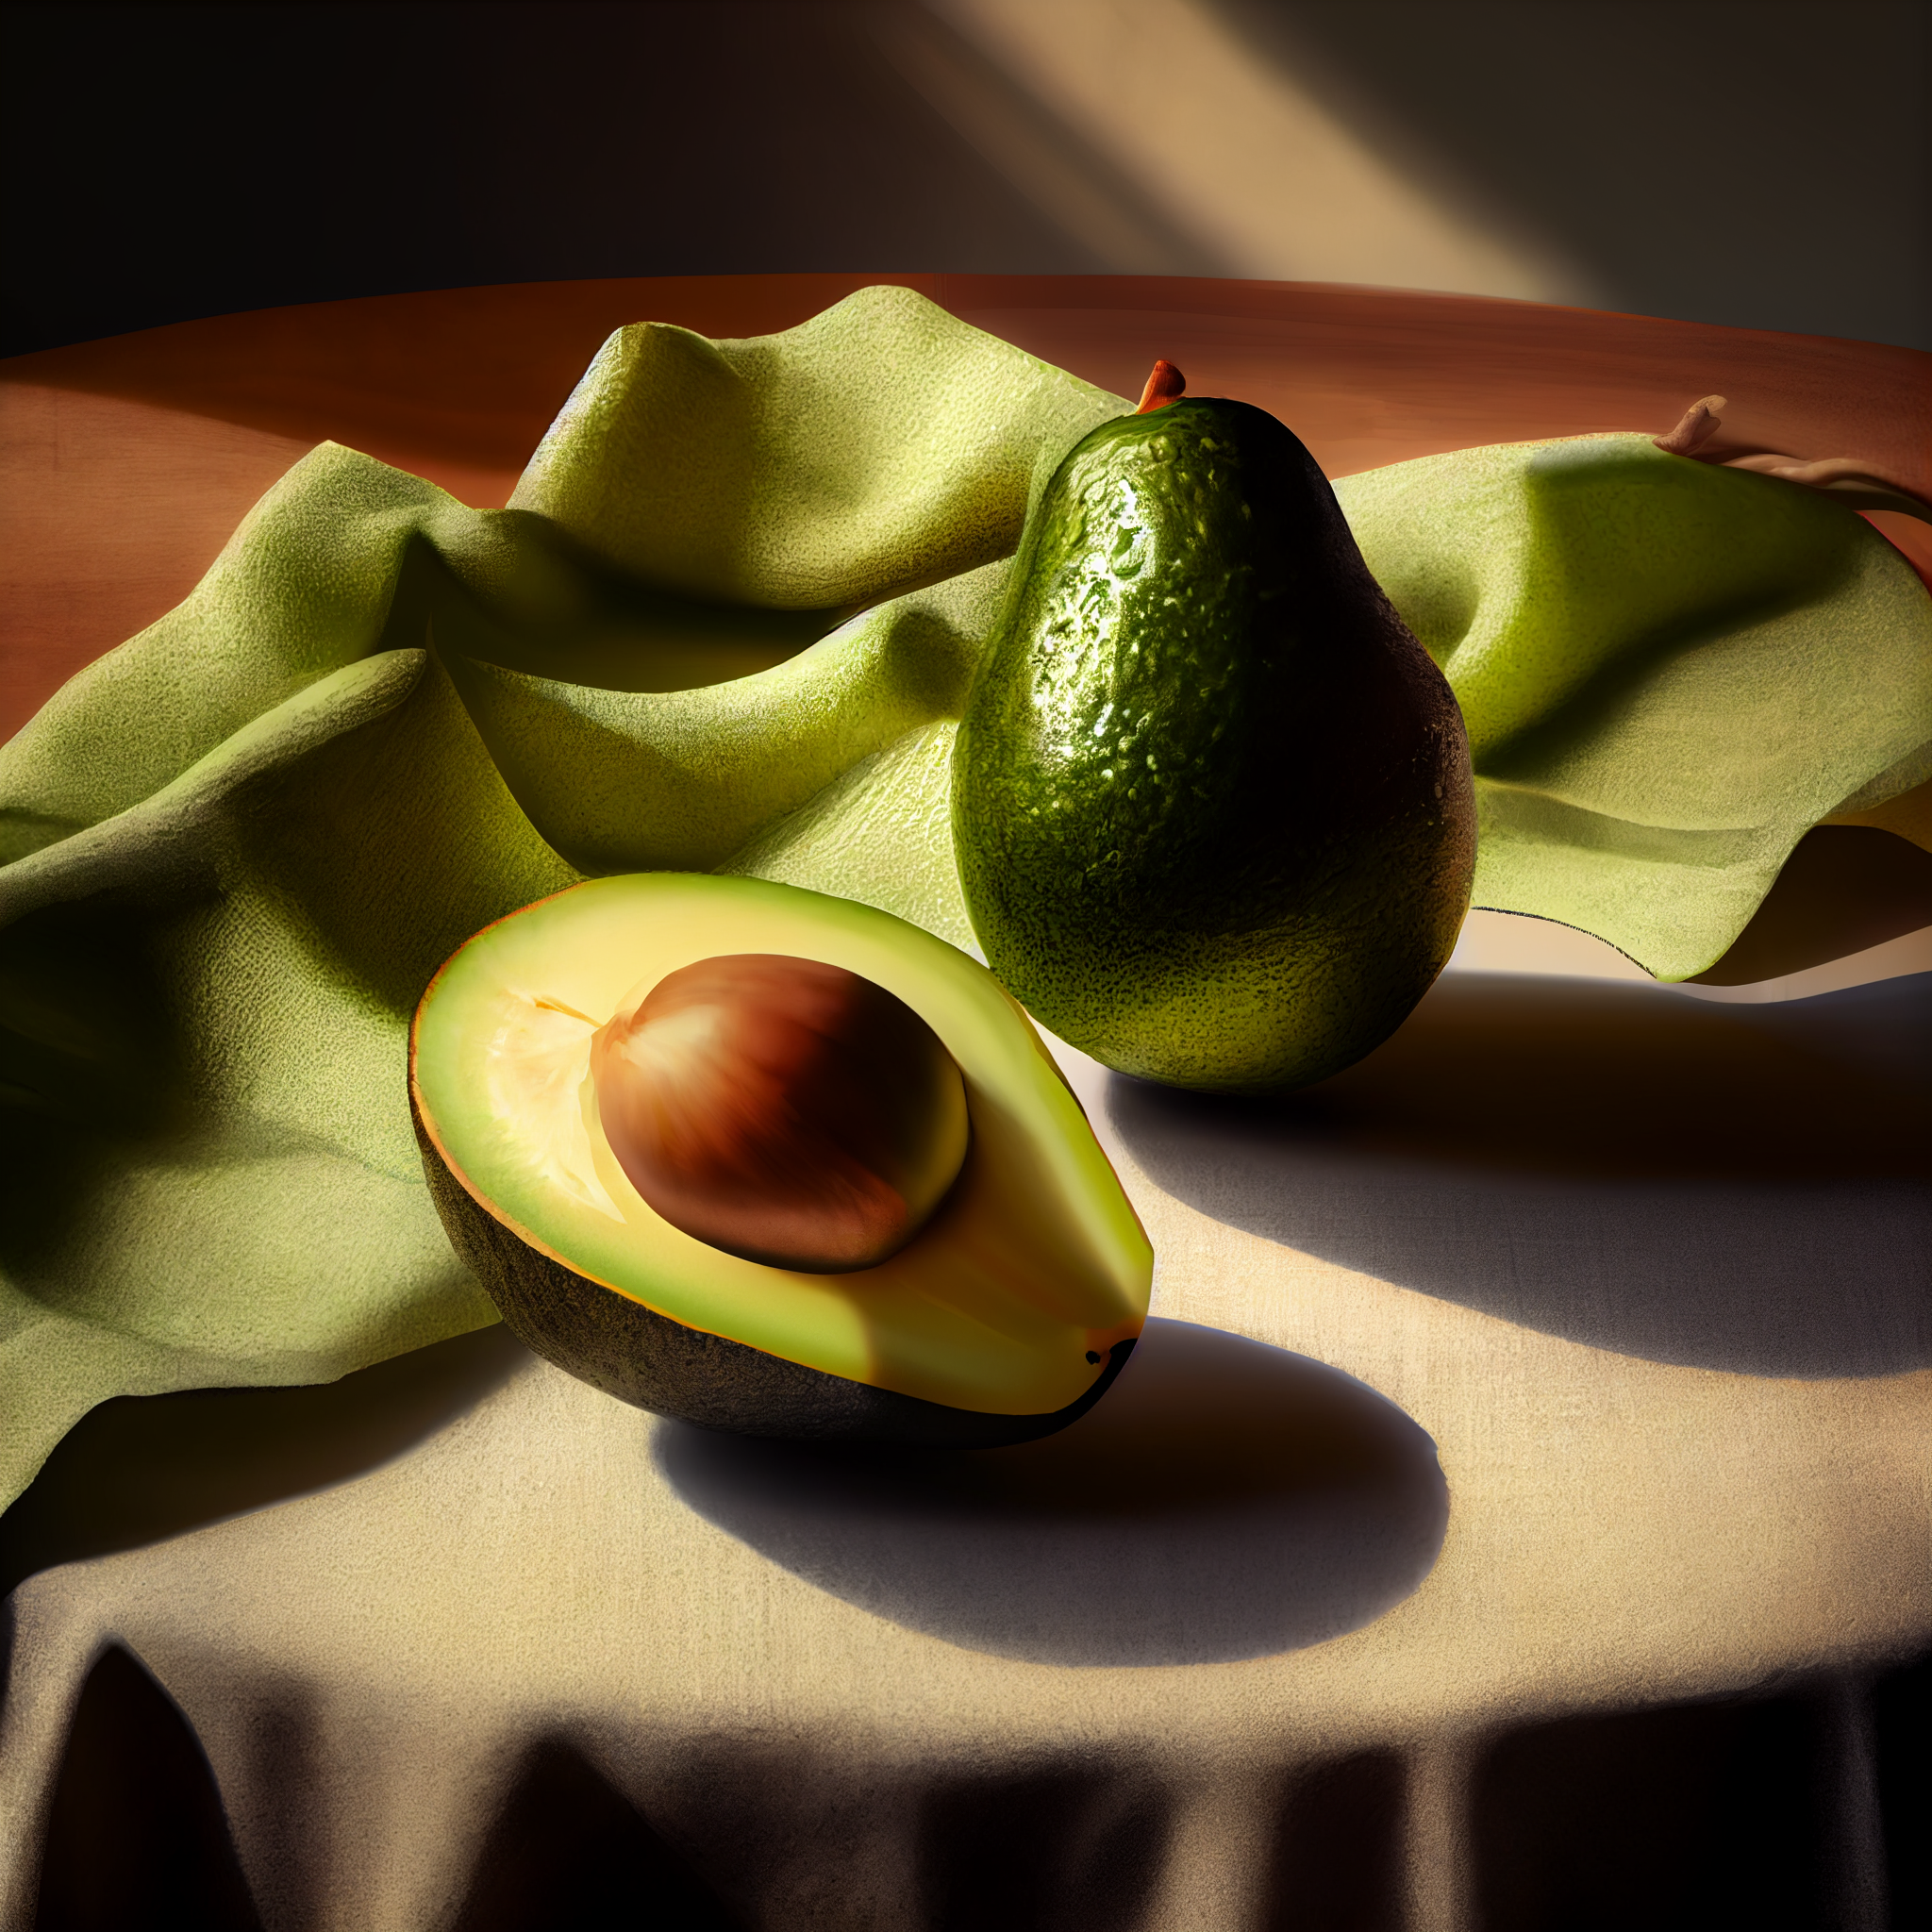 Ripe and Ready: A Stunning Oil Color Print of Avocado Halves on a Tablecloth